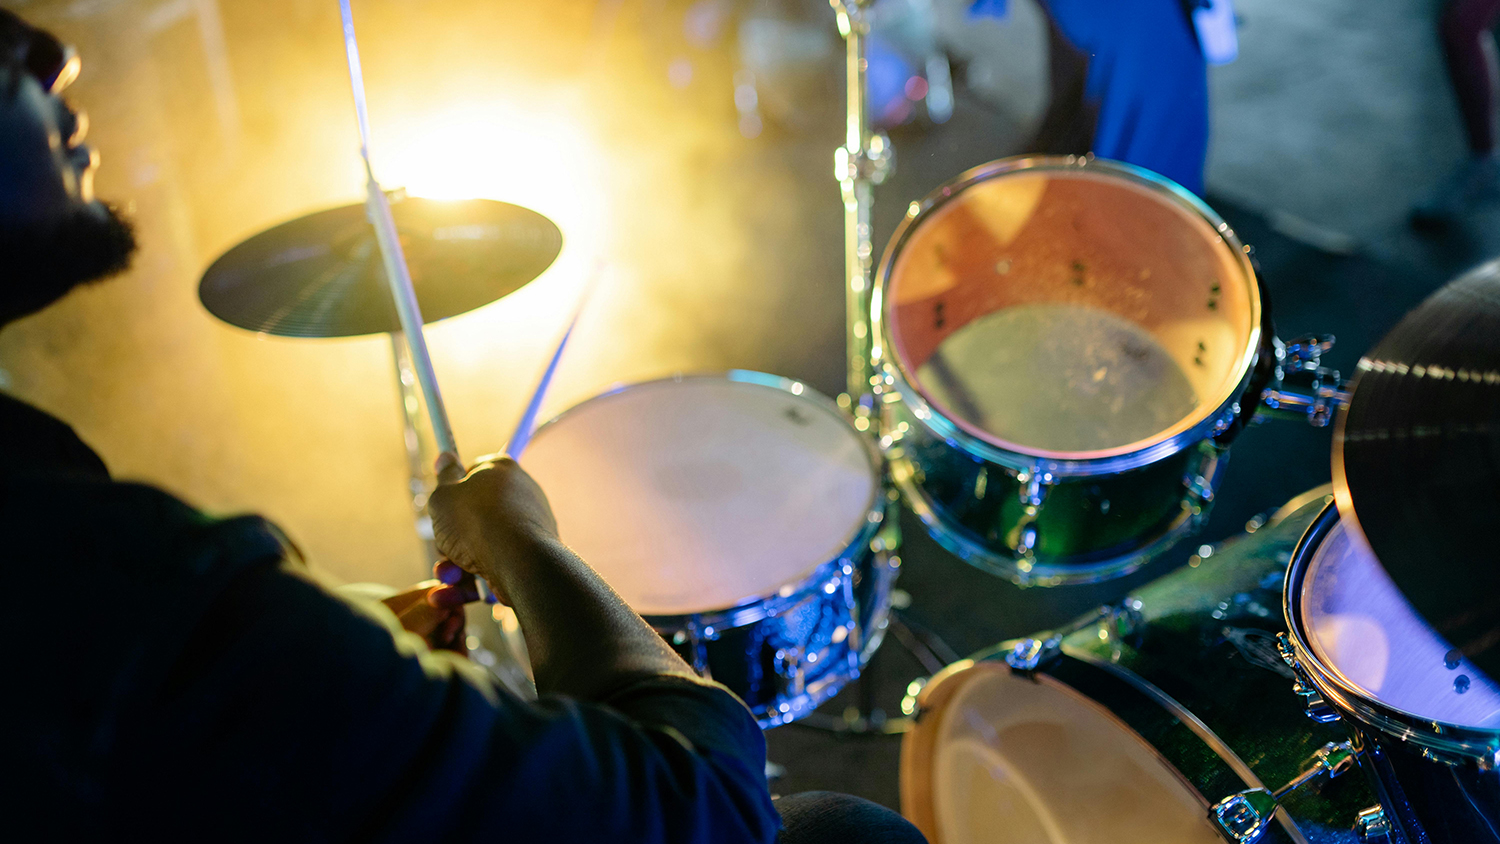 A person plays the drums on stage at a music concert. [pexels-yankrukov]